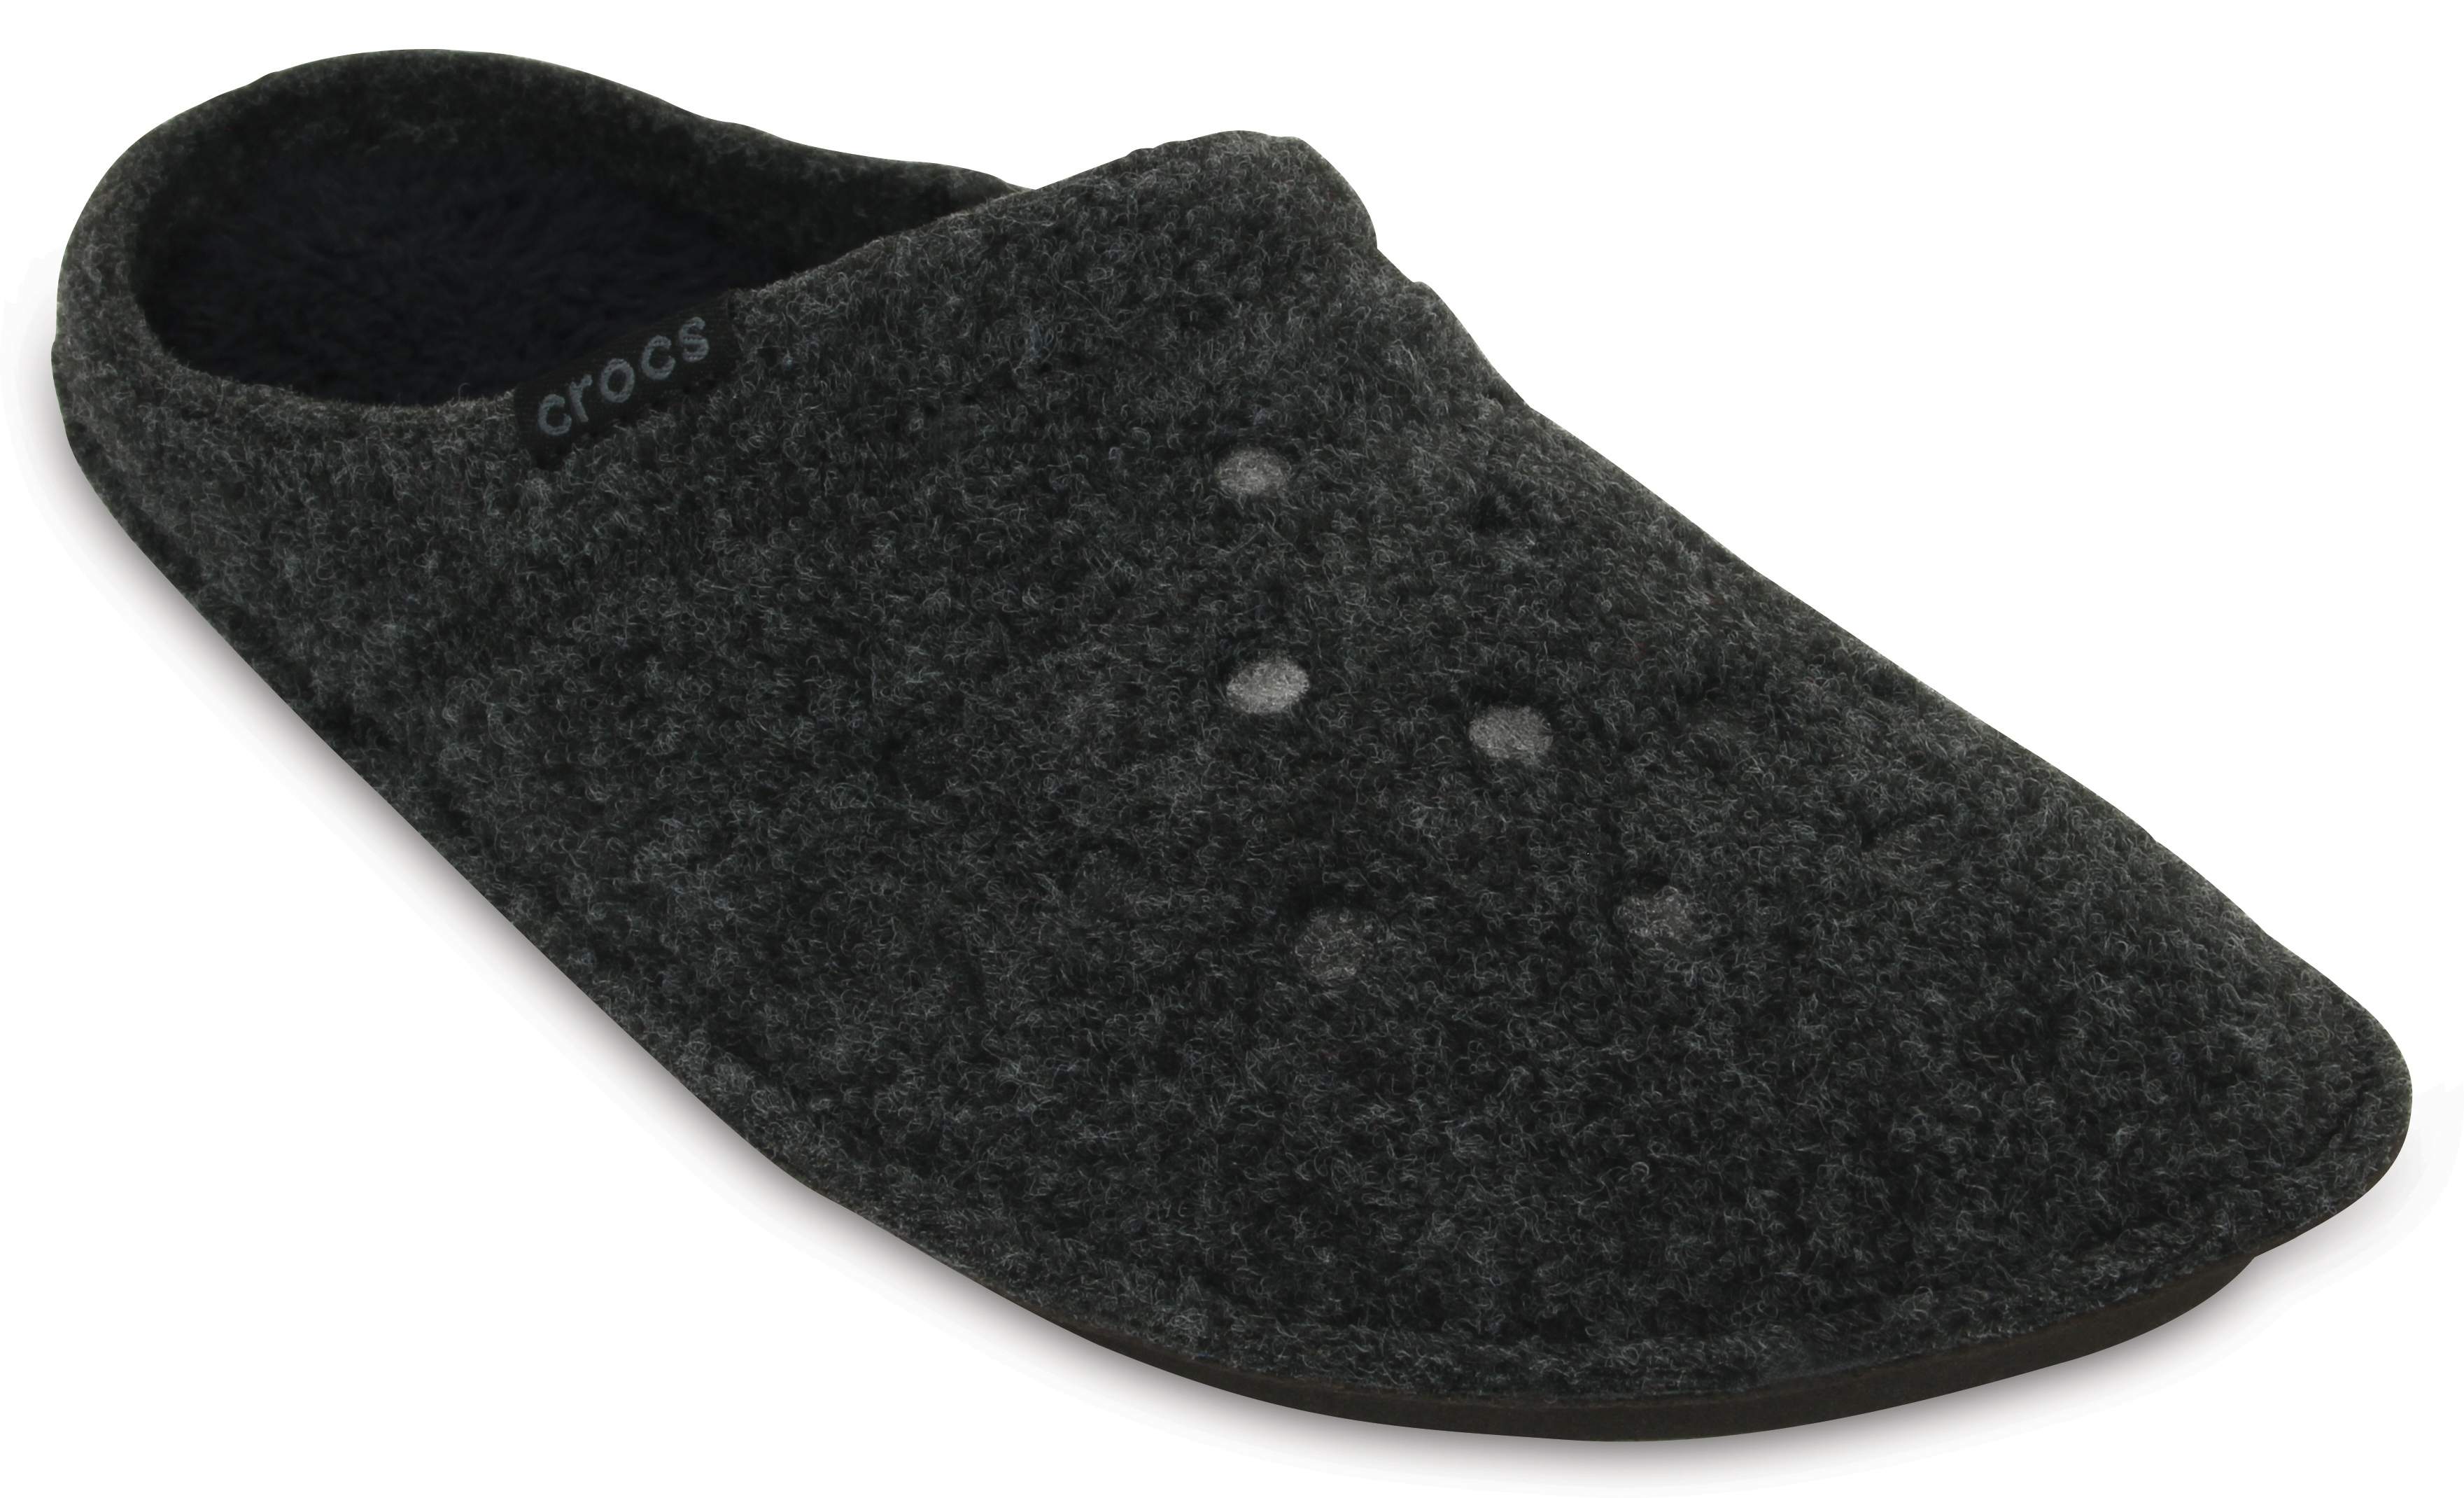 crocs slippers offers